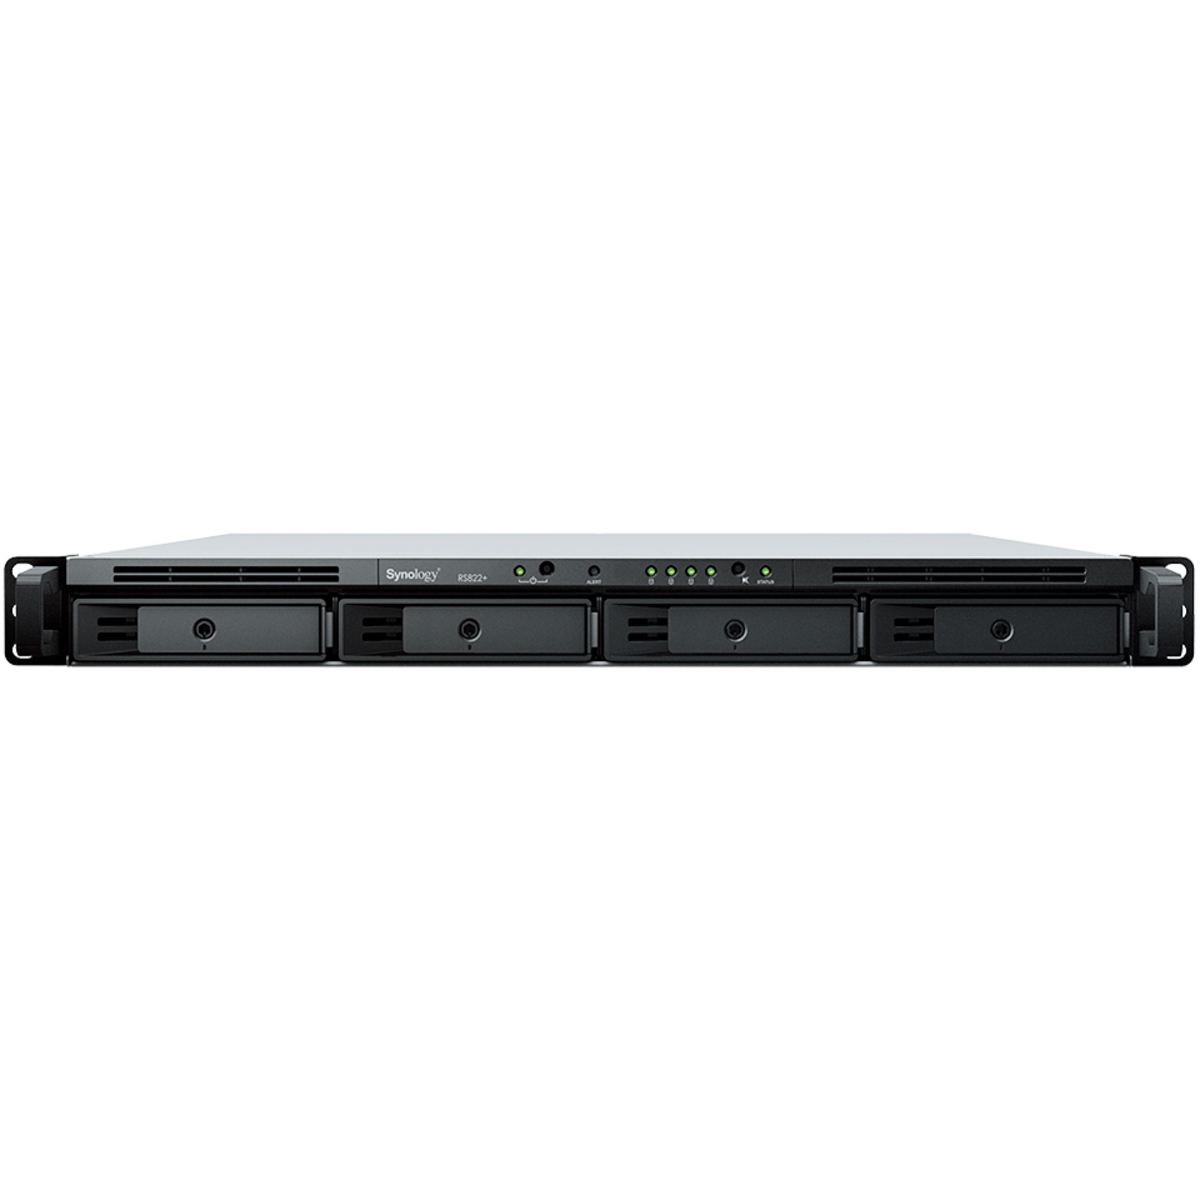 Synology RackStation RS822RP+ 72tb 4-Bay RackMount Multimedia / Power User / Business NAS - Network Attached Storage Device 4x18tb Seagate EXOS X18 ST18000NM000J 3.5 7200rpm SATA 6Gb/s HDD ENTERPRISE Class Drives Installed - Burn-In Tested - FREE RAM UPGRADE RackStation RS822RP+